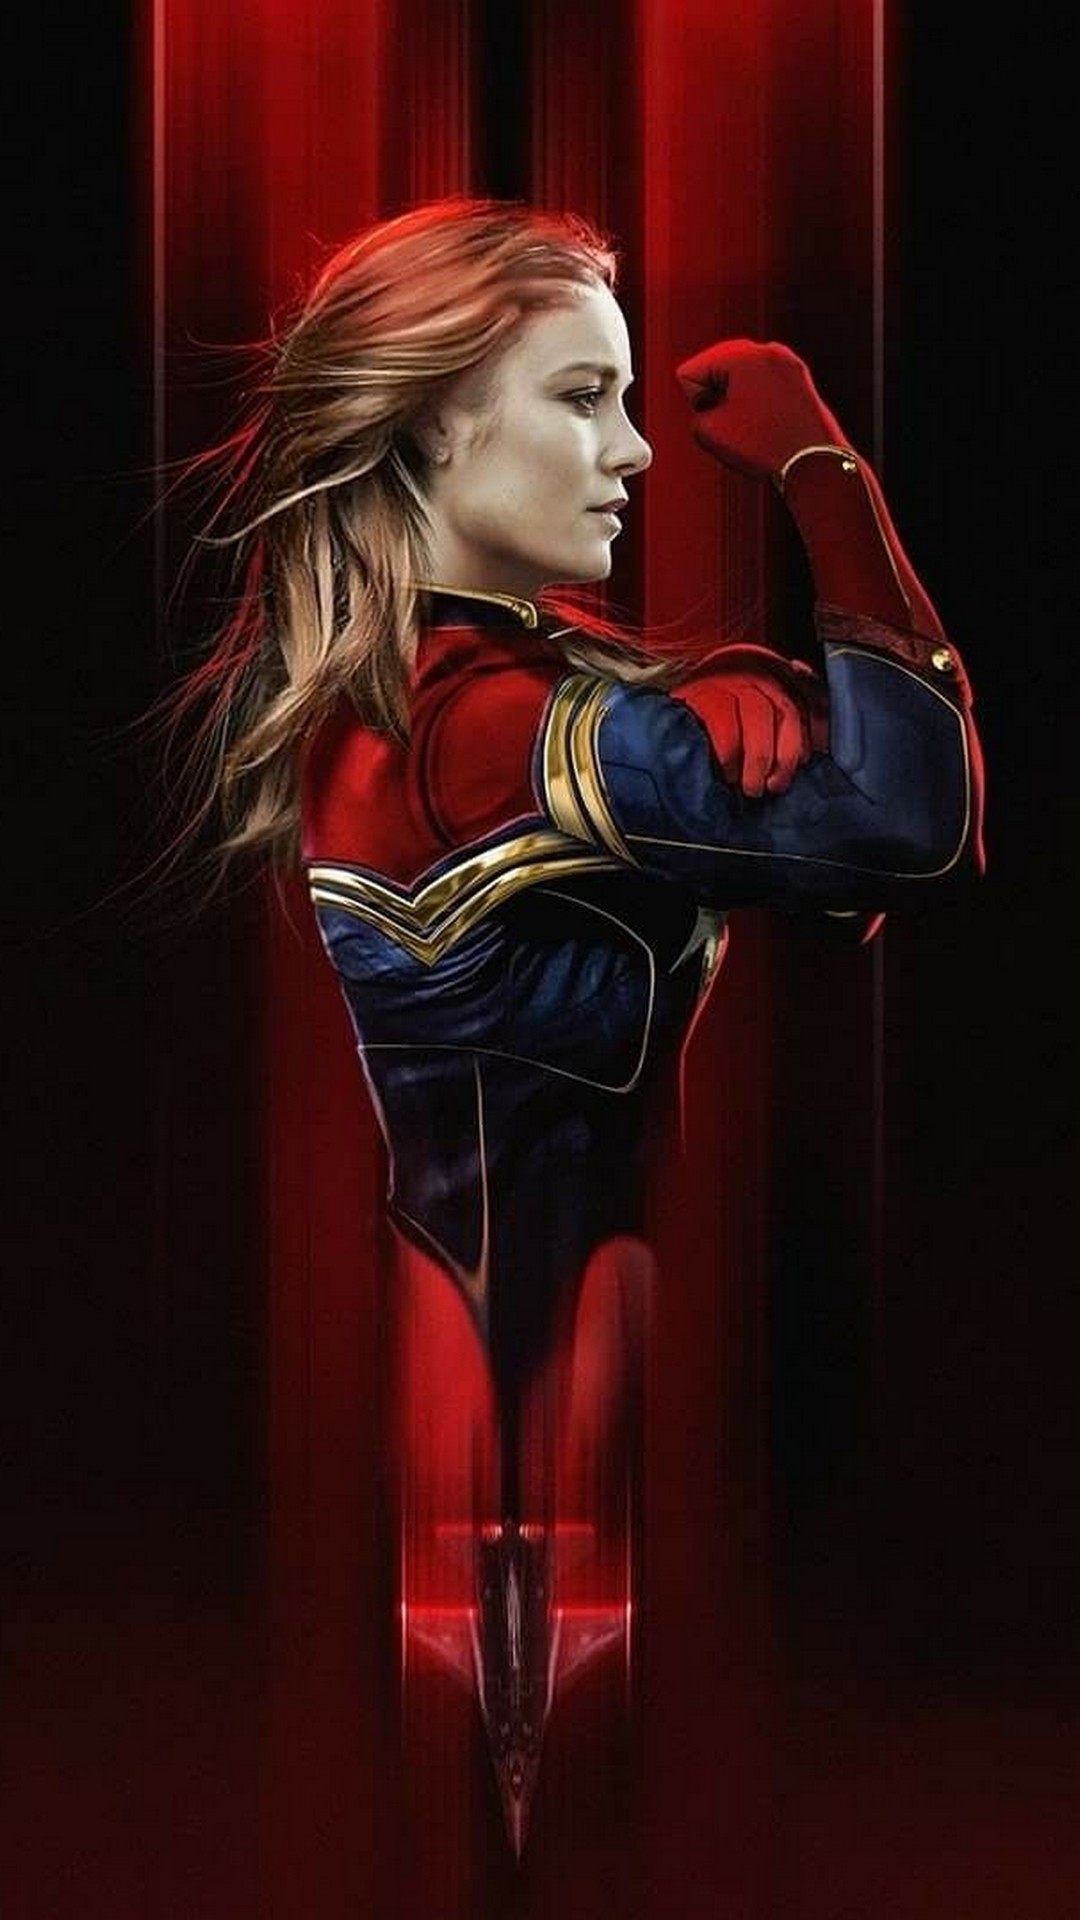 Captain Marvel Hd Wallpapers